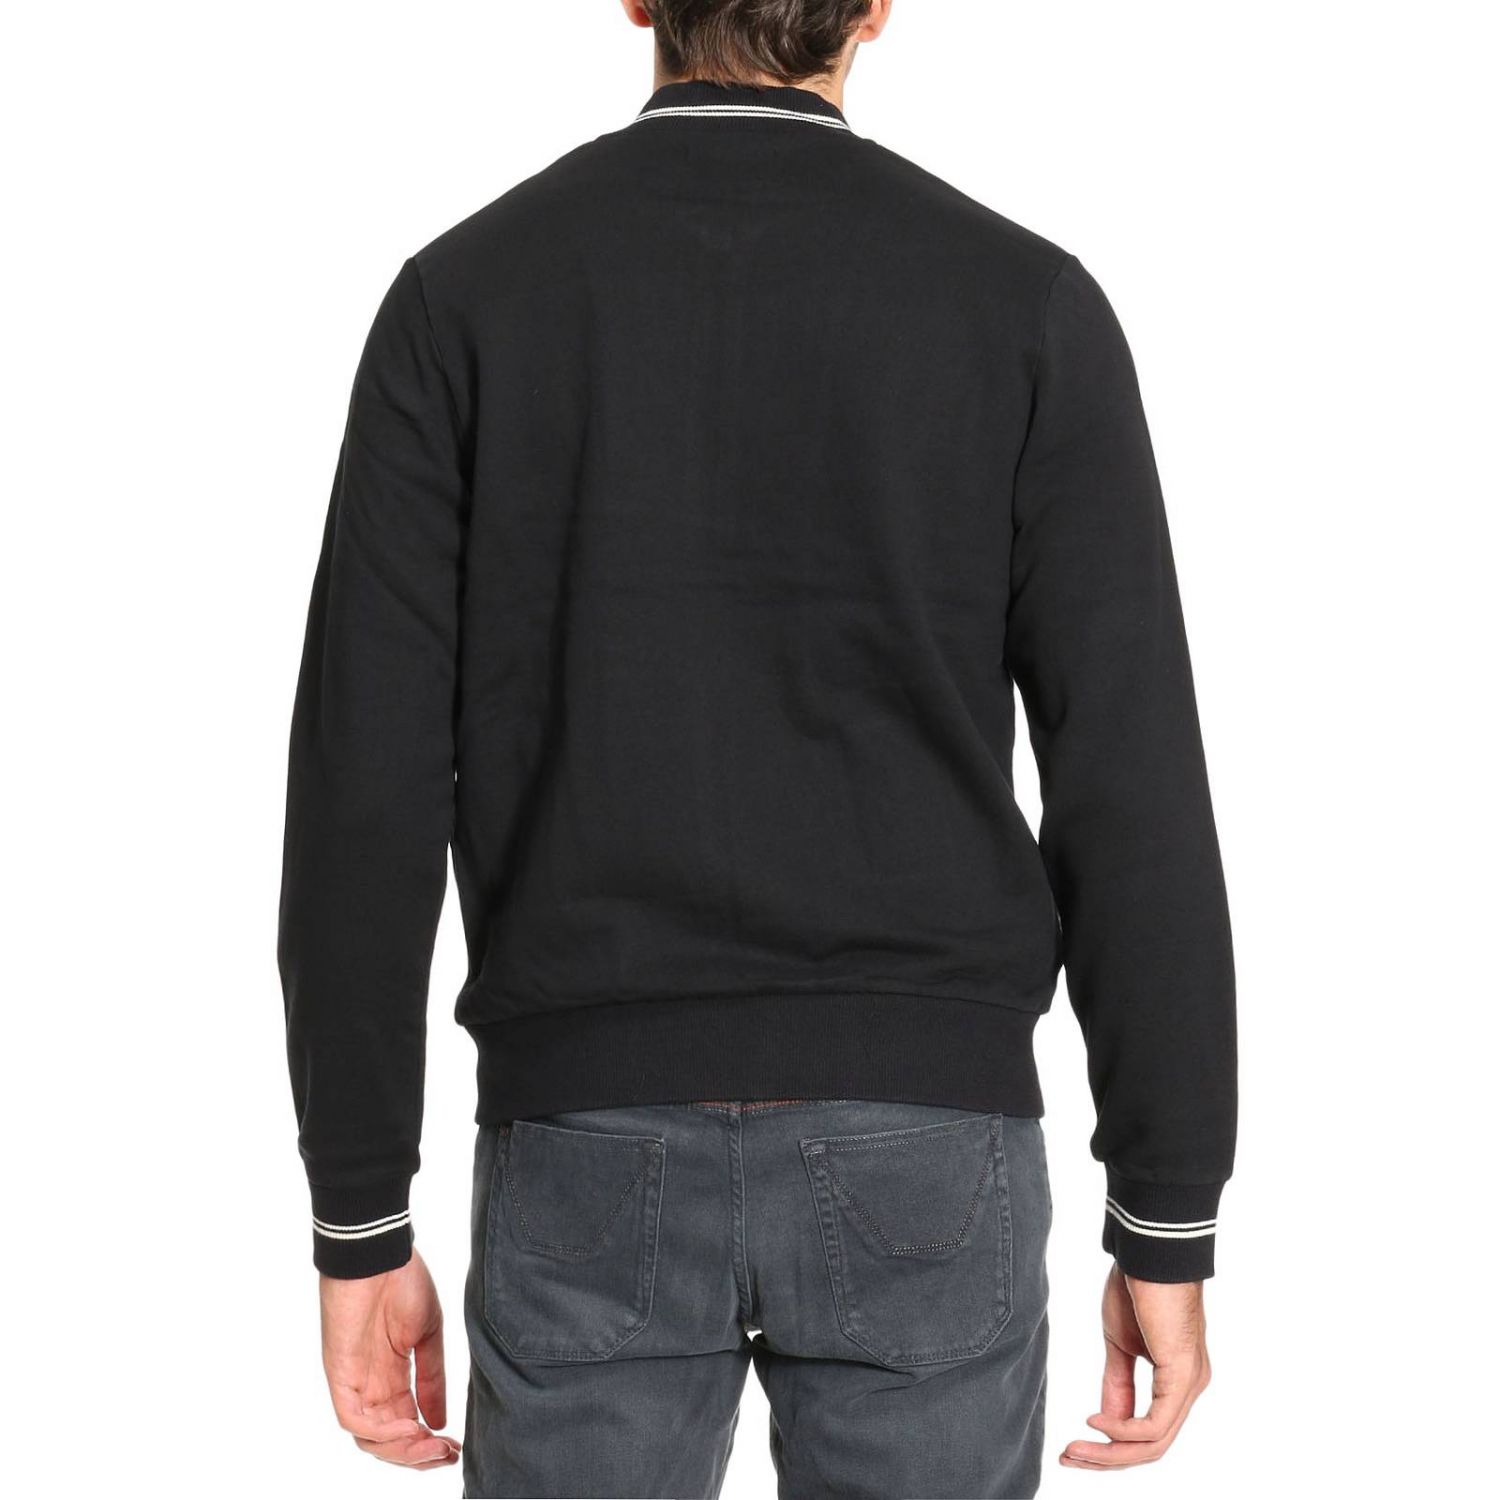 Fred Perry Outlet: Sweater men | Sweatshirt Fred Perry Men Black ...